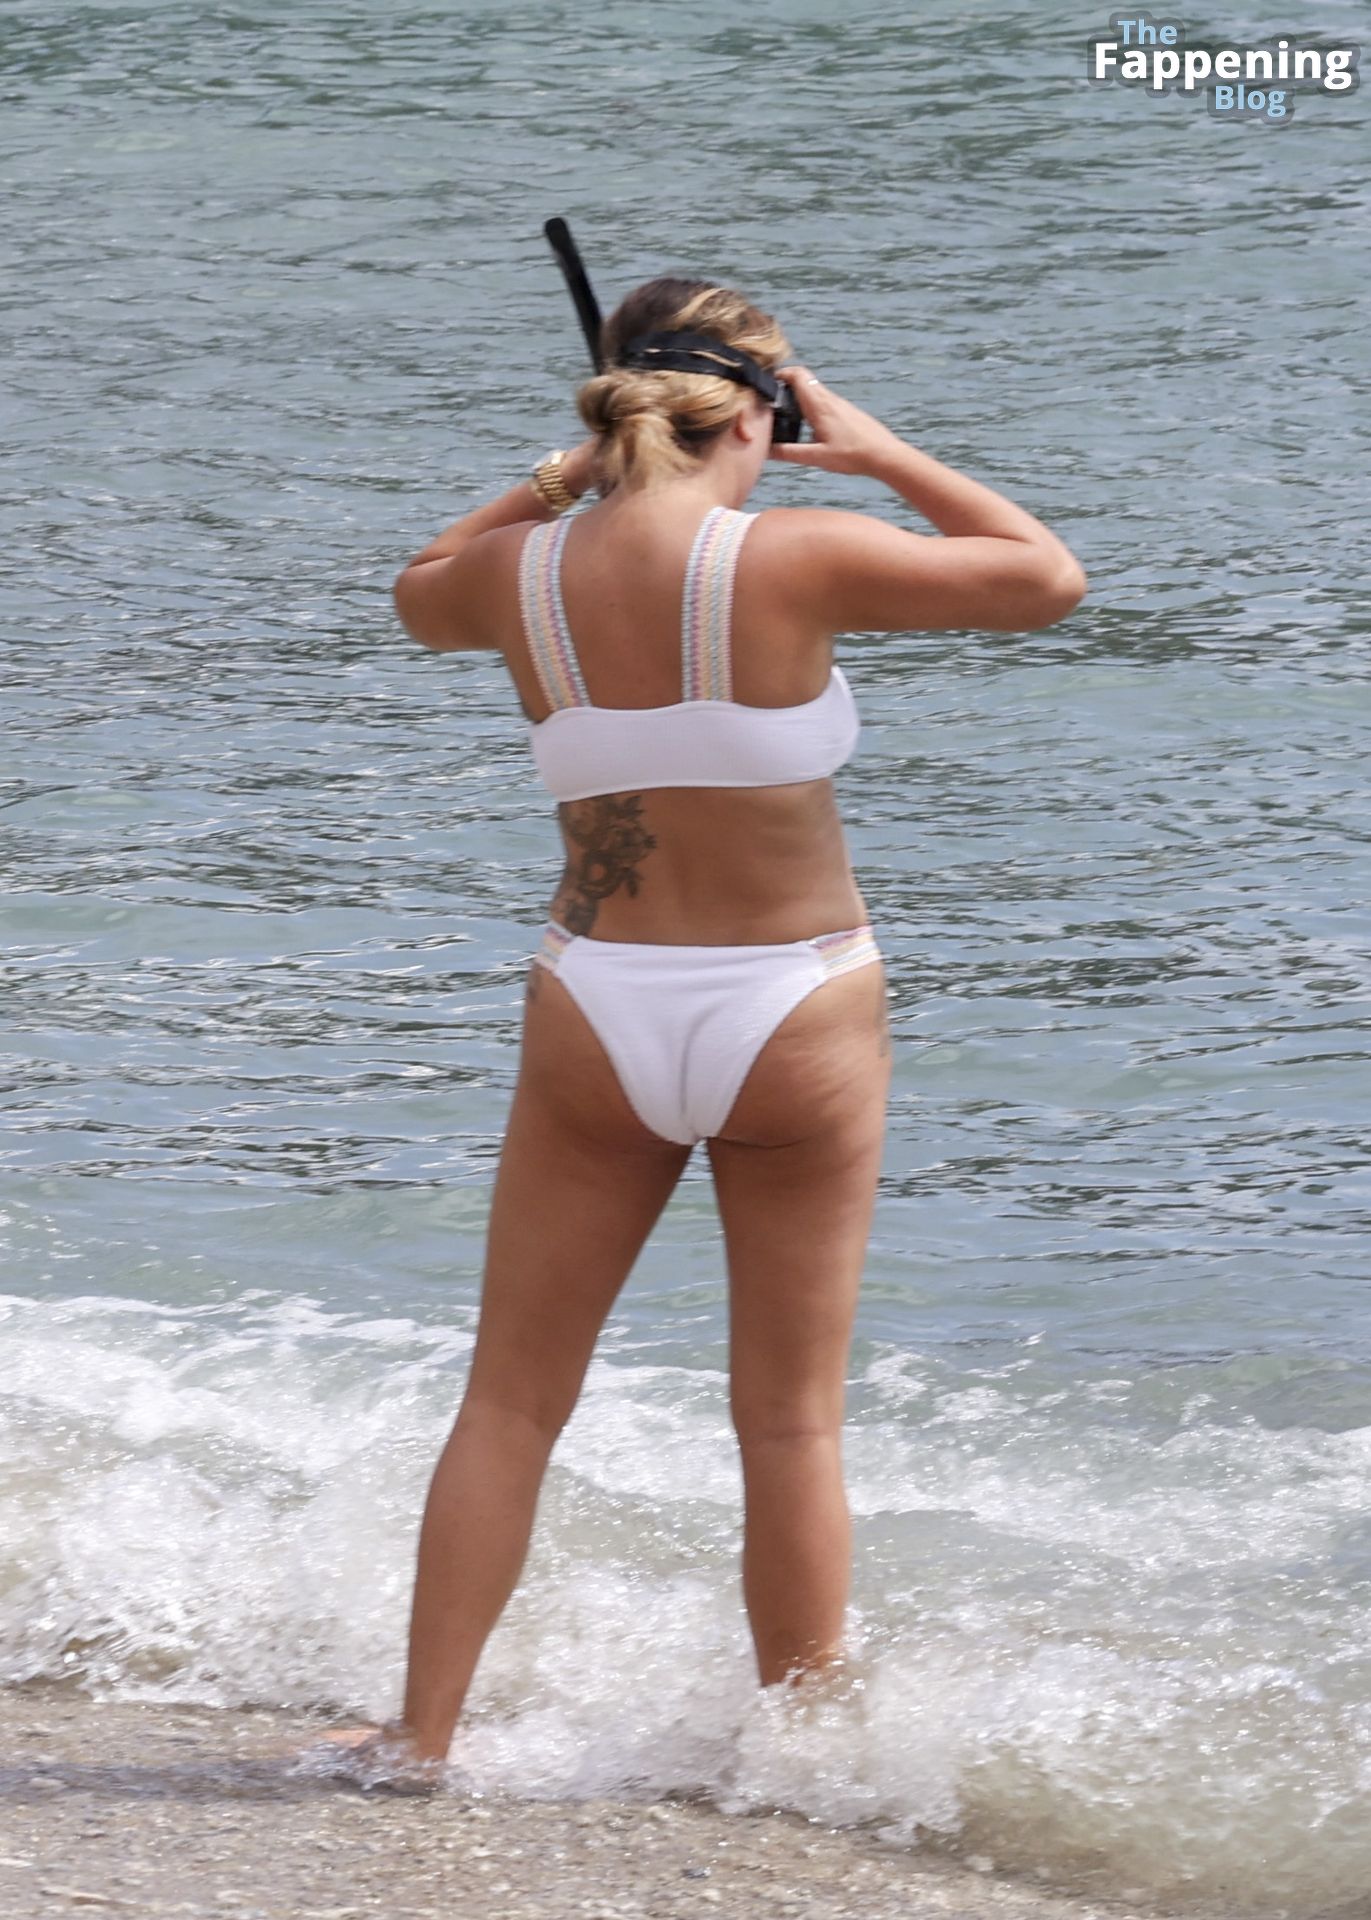 Charlotte-Crosby-Sexy-10-The-Fappening-Blog.jpg